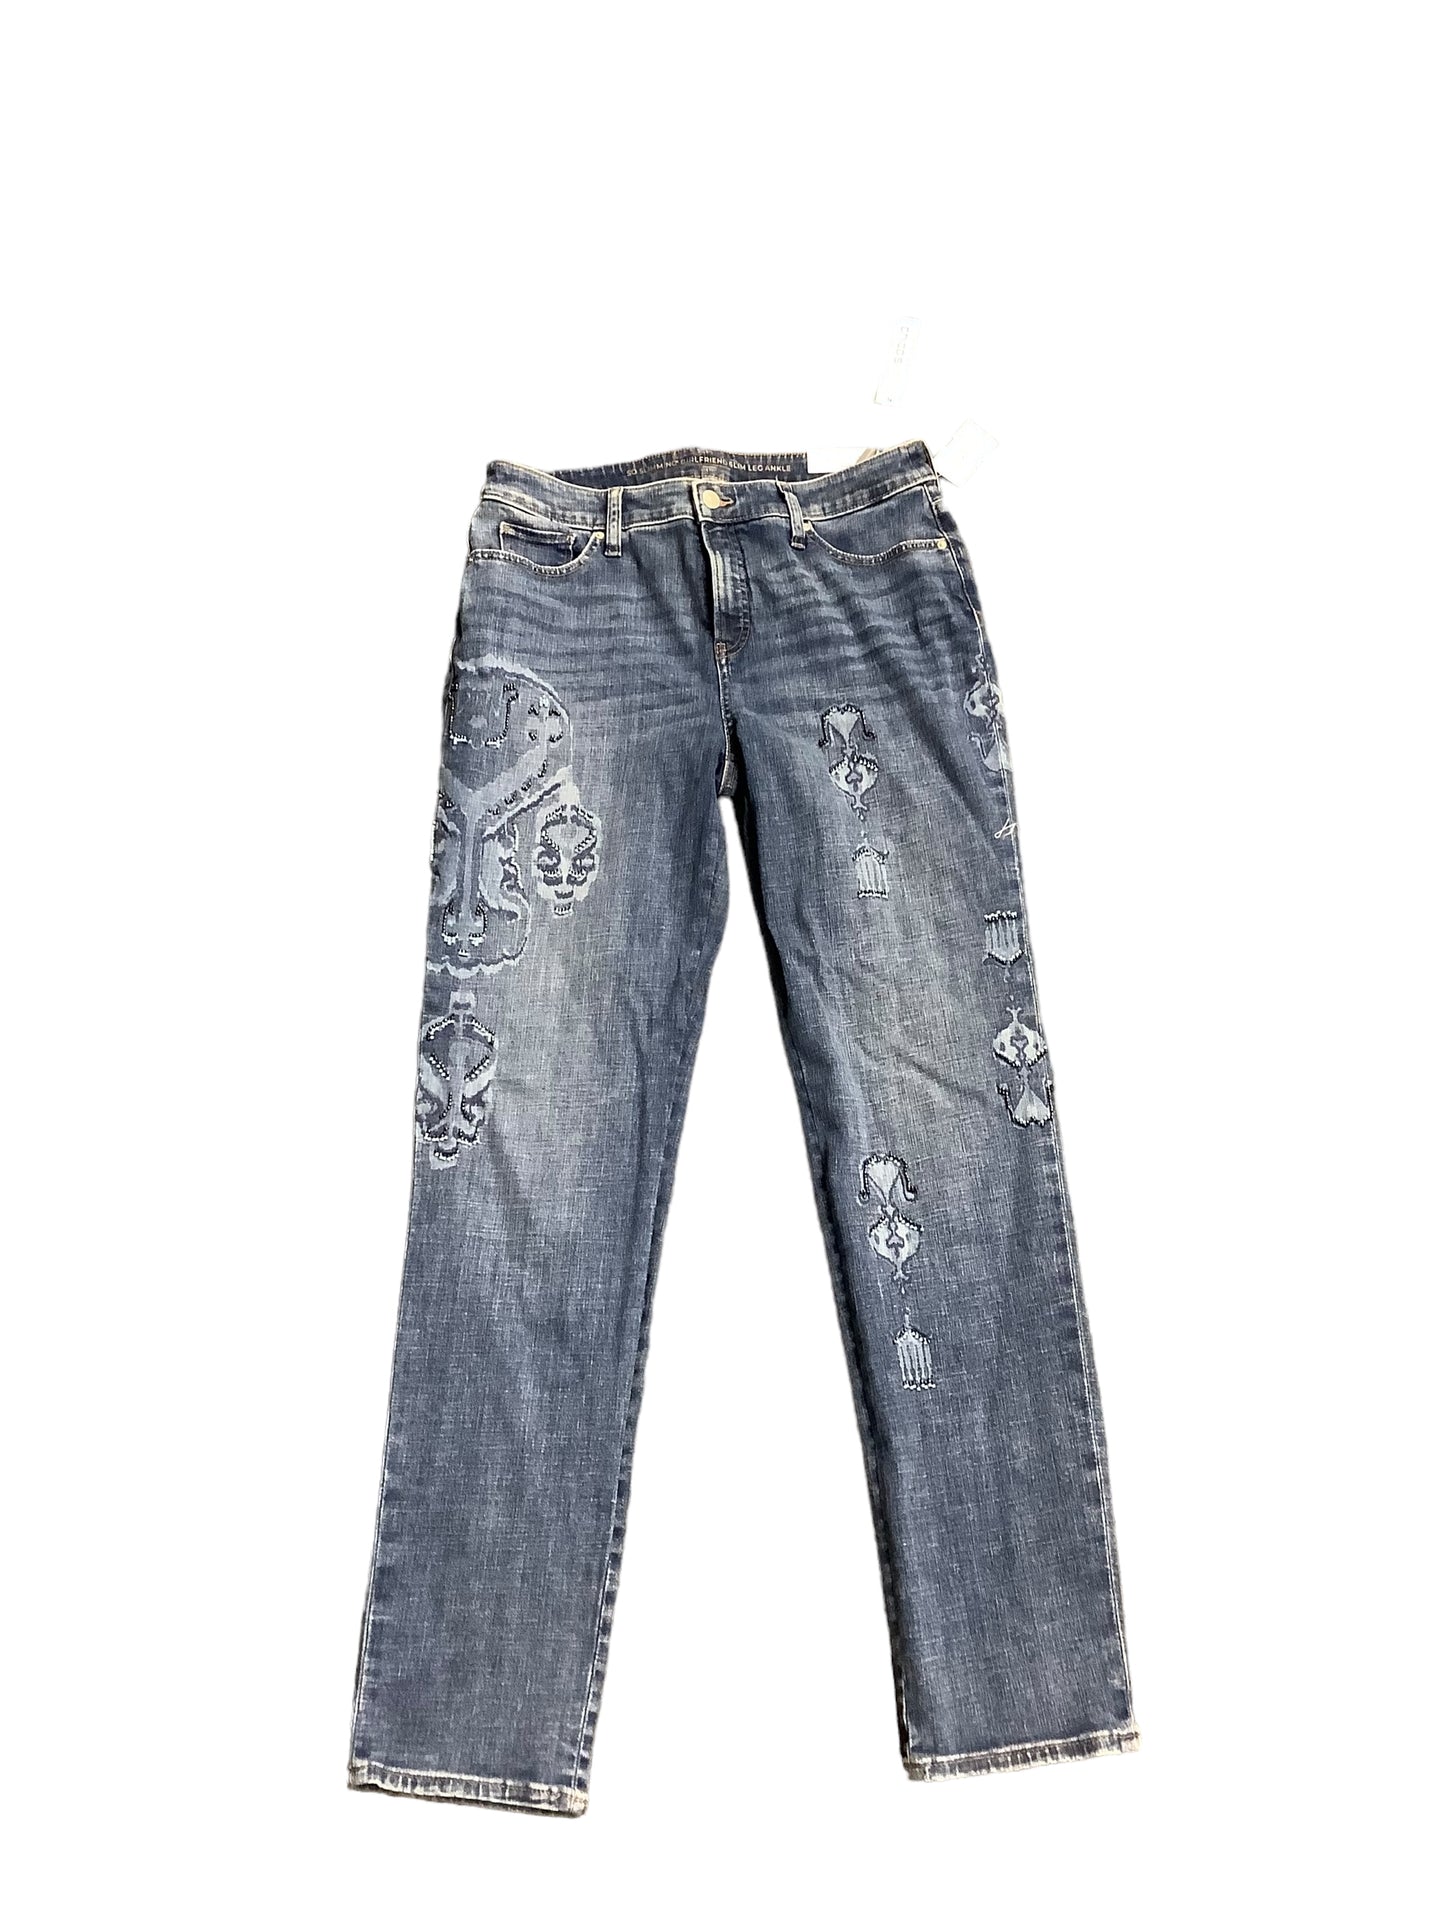 Jeans Skinny By Chicos Size: 8tall – Clothes Mentor Springfield IL #232